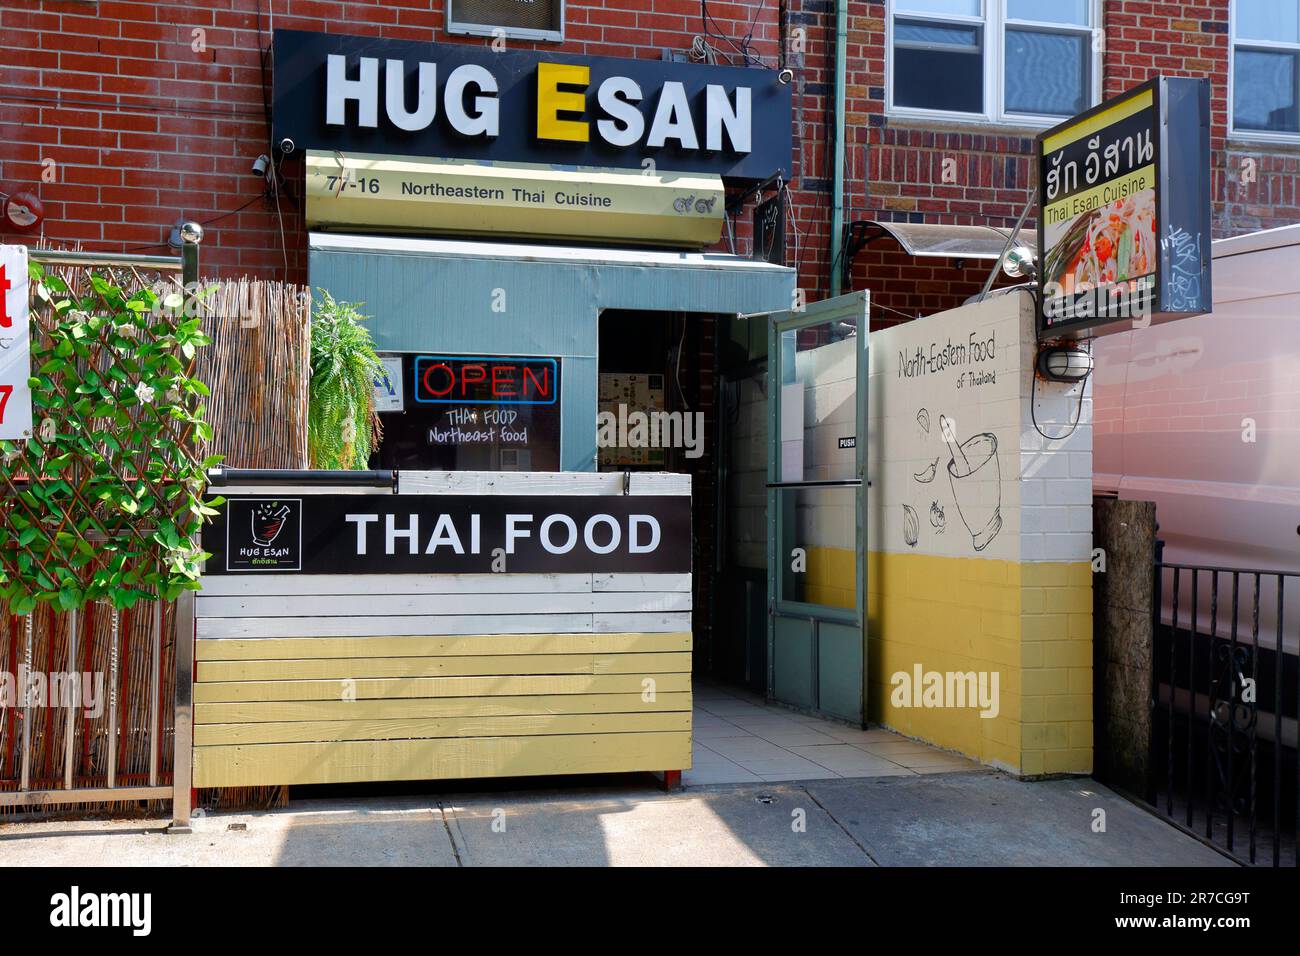 Hug Esan, 77-16 Woodside Ave, Queens, New York, NYC storefront photo of a North Eastern Thai restaurant in the Elmhurst neighborhood. Stock Photo